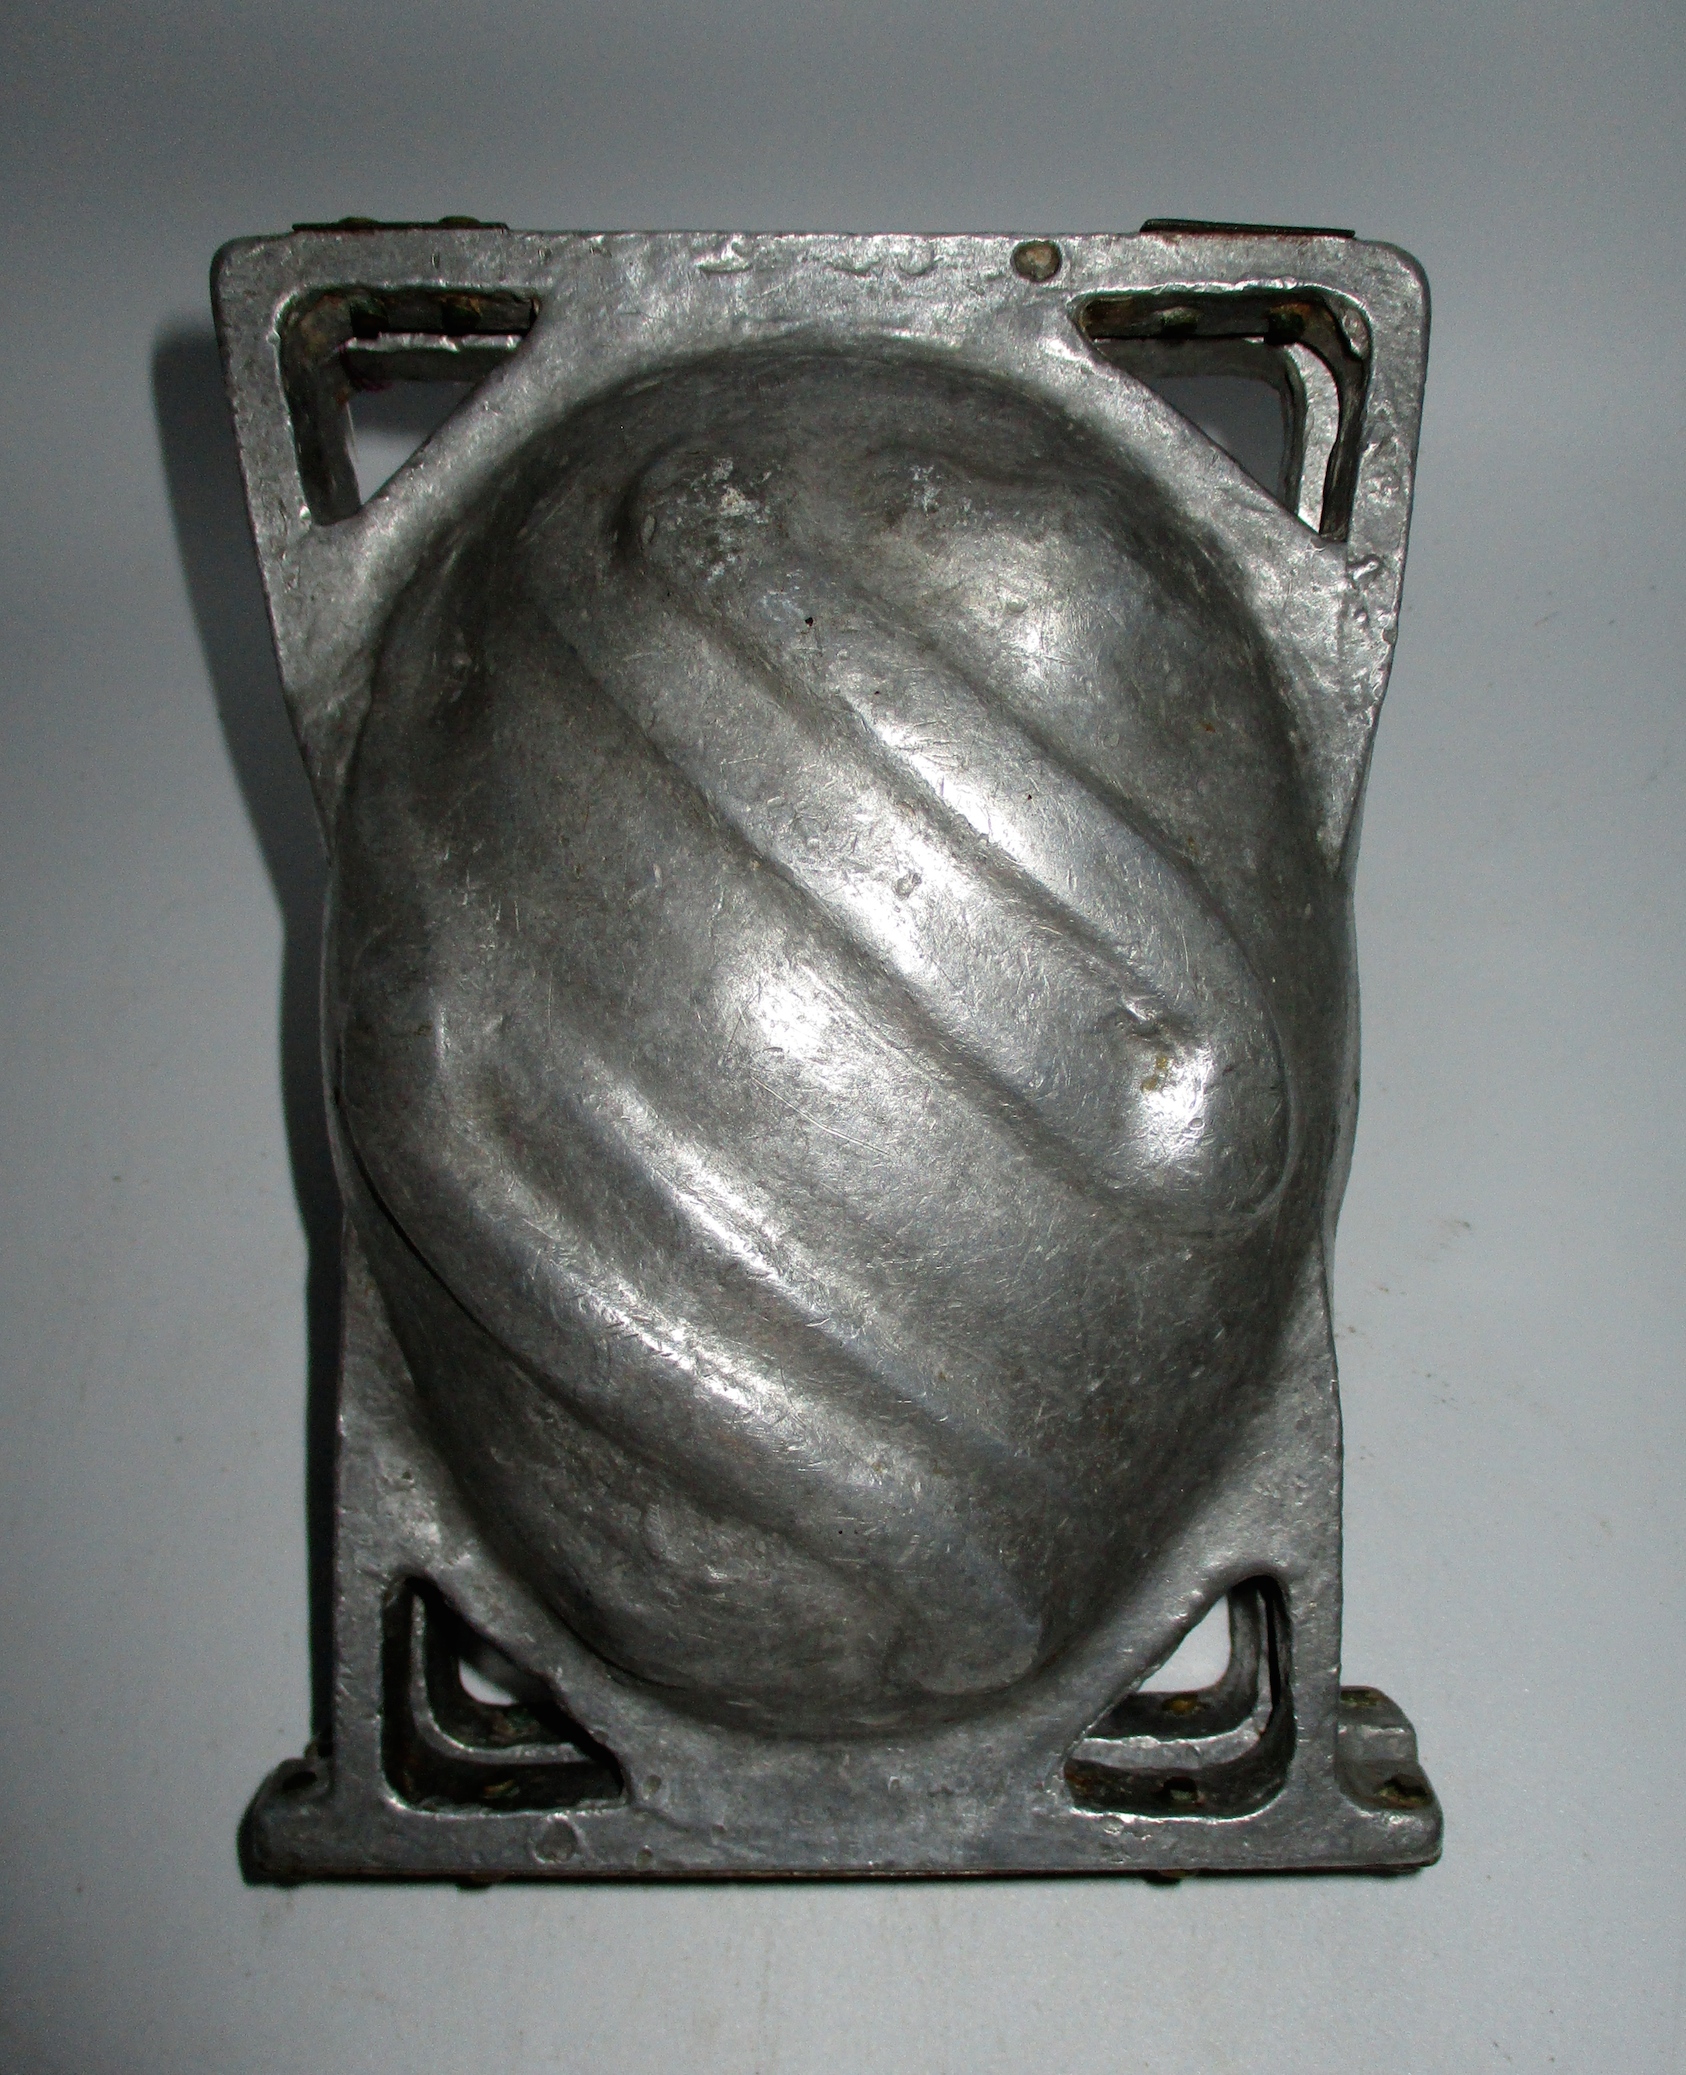 2-Piece Pewter Egg-shaped Ice Cream or Chocolate Mold2-Piece Pewter Egg-shaped Ice Cream or Chocolate Mold 6" x 8 x 5 7/8"